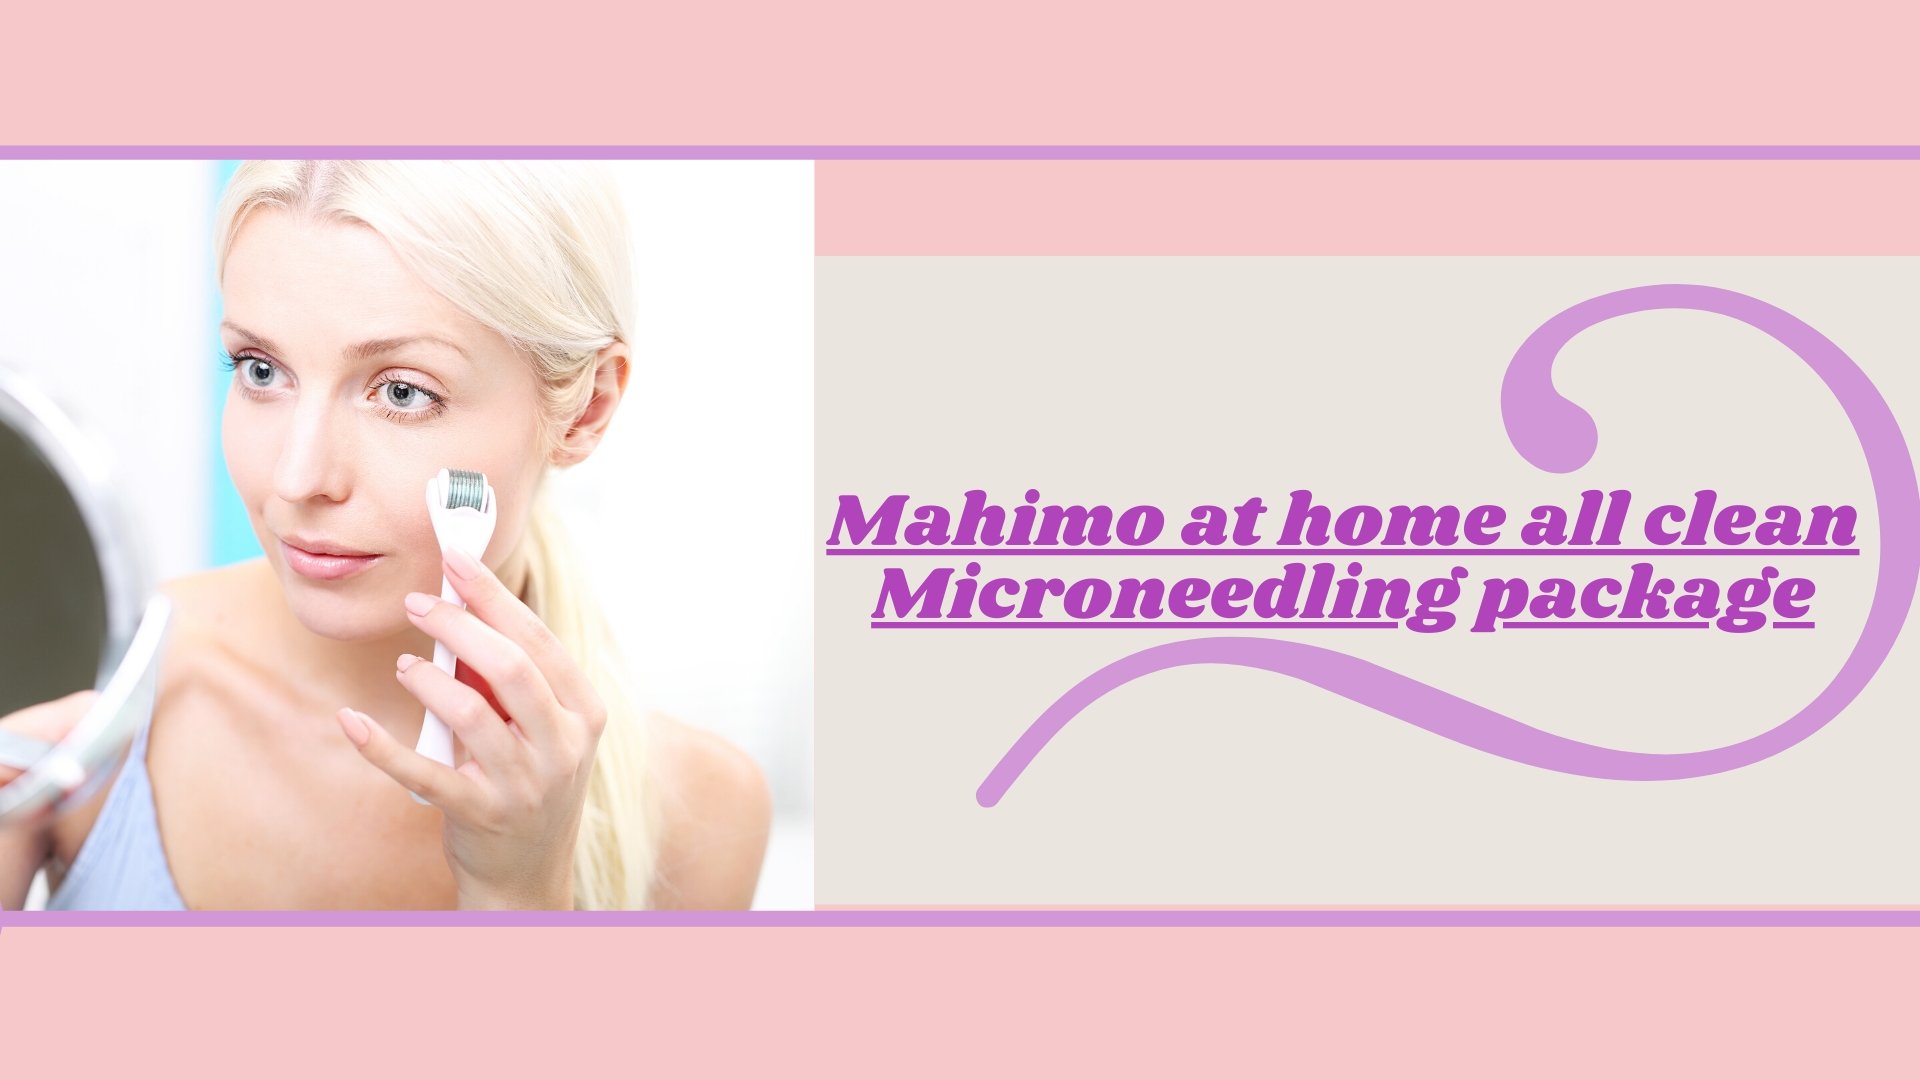 Mahimo at home all clean Microneedling package